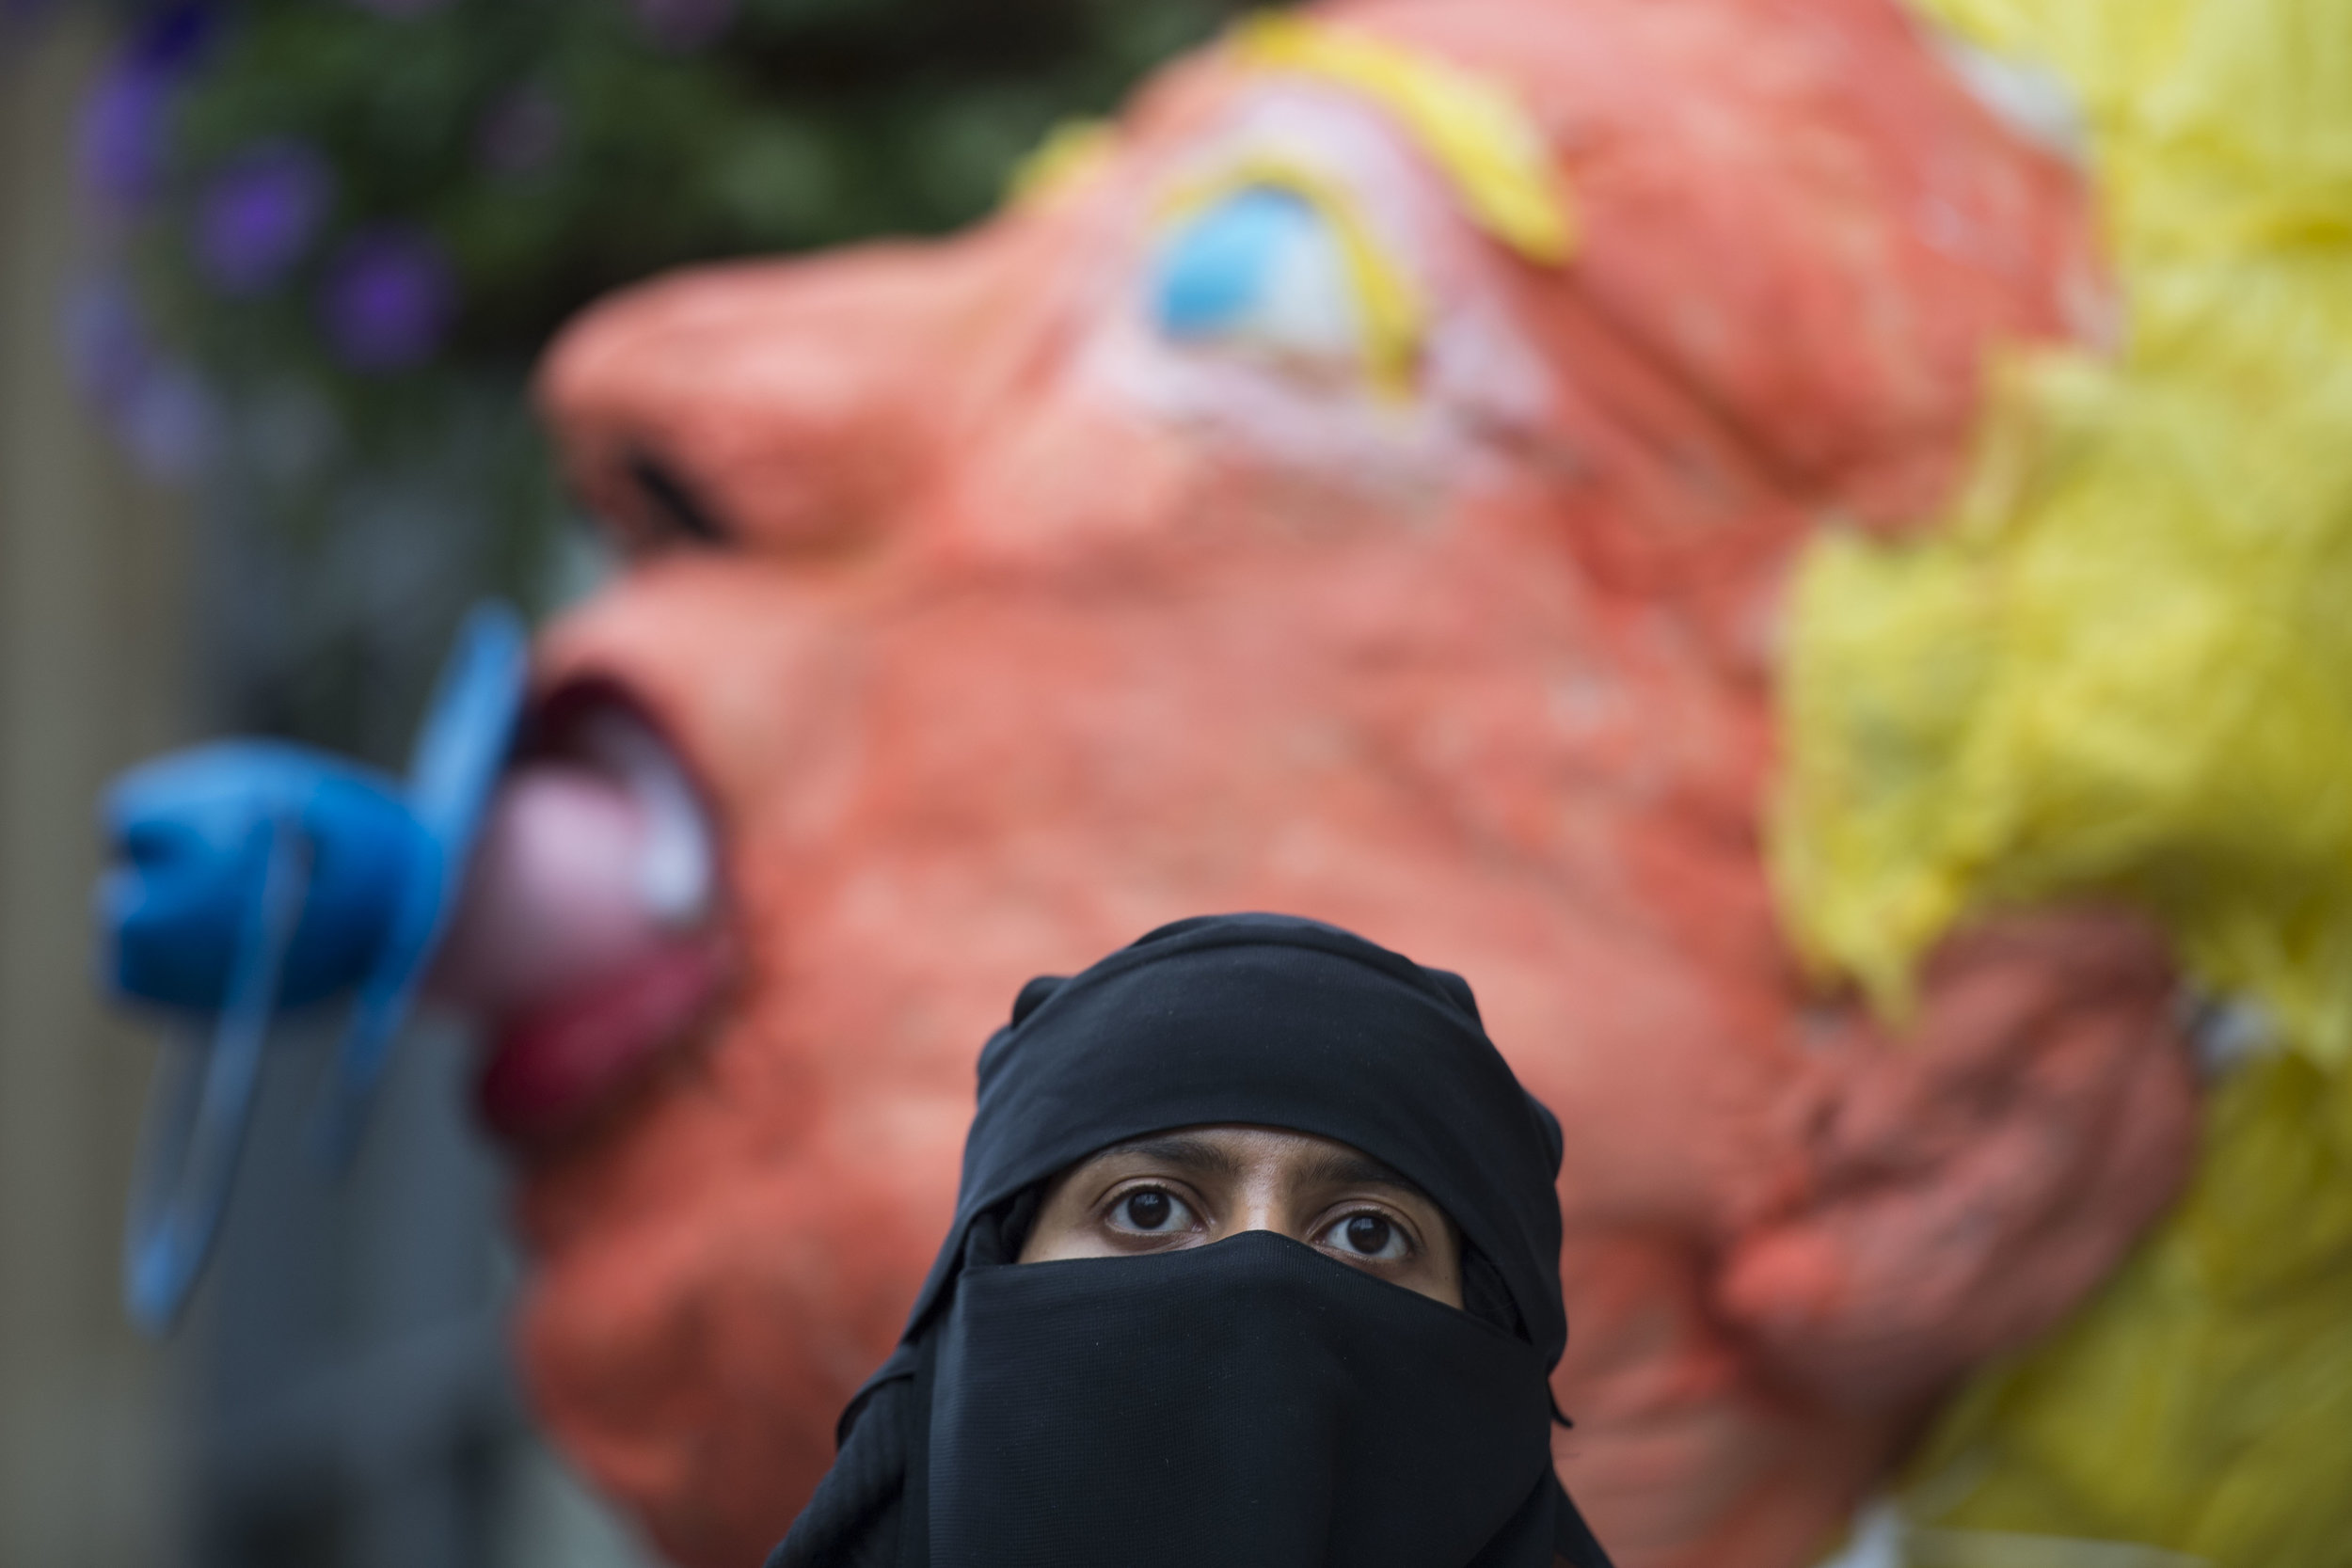  CARDIFF, UNITED KINGDOM - JULY 12: Sahar Al-Faifi stands in front of a giant Donald Trump model on Queen Street in Cardiff while protesting against a visit by the President of the United States Donald Trump on July 12, 2018 in Cardiff, United Kingdo